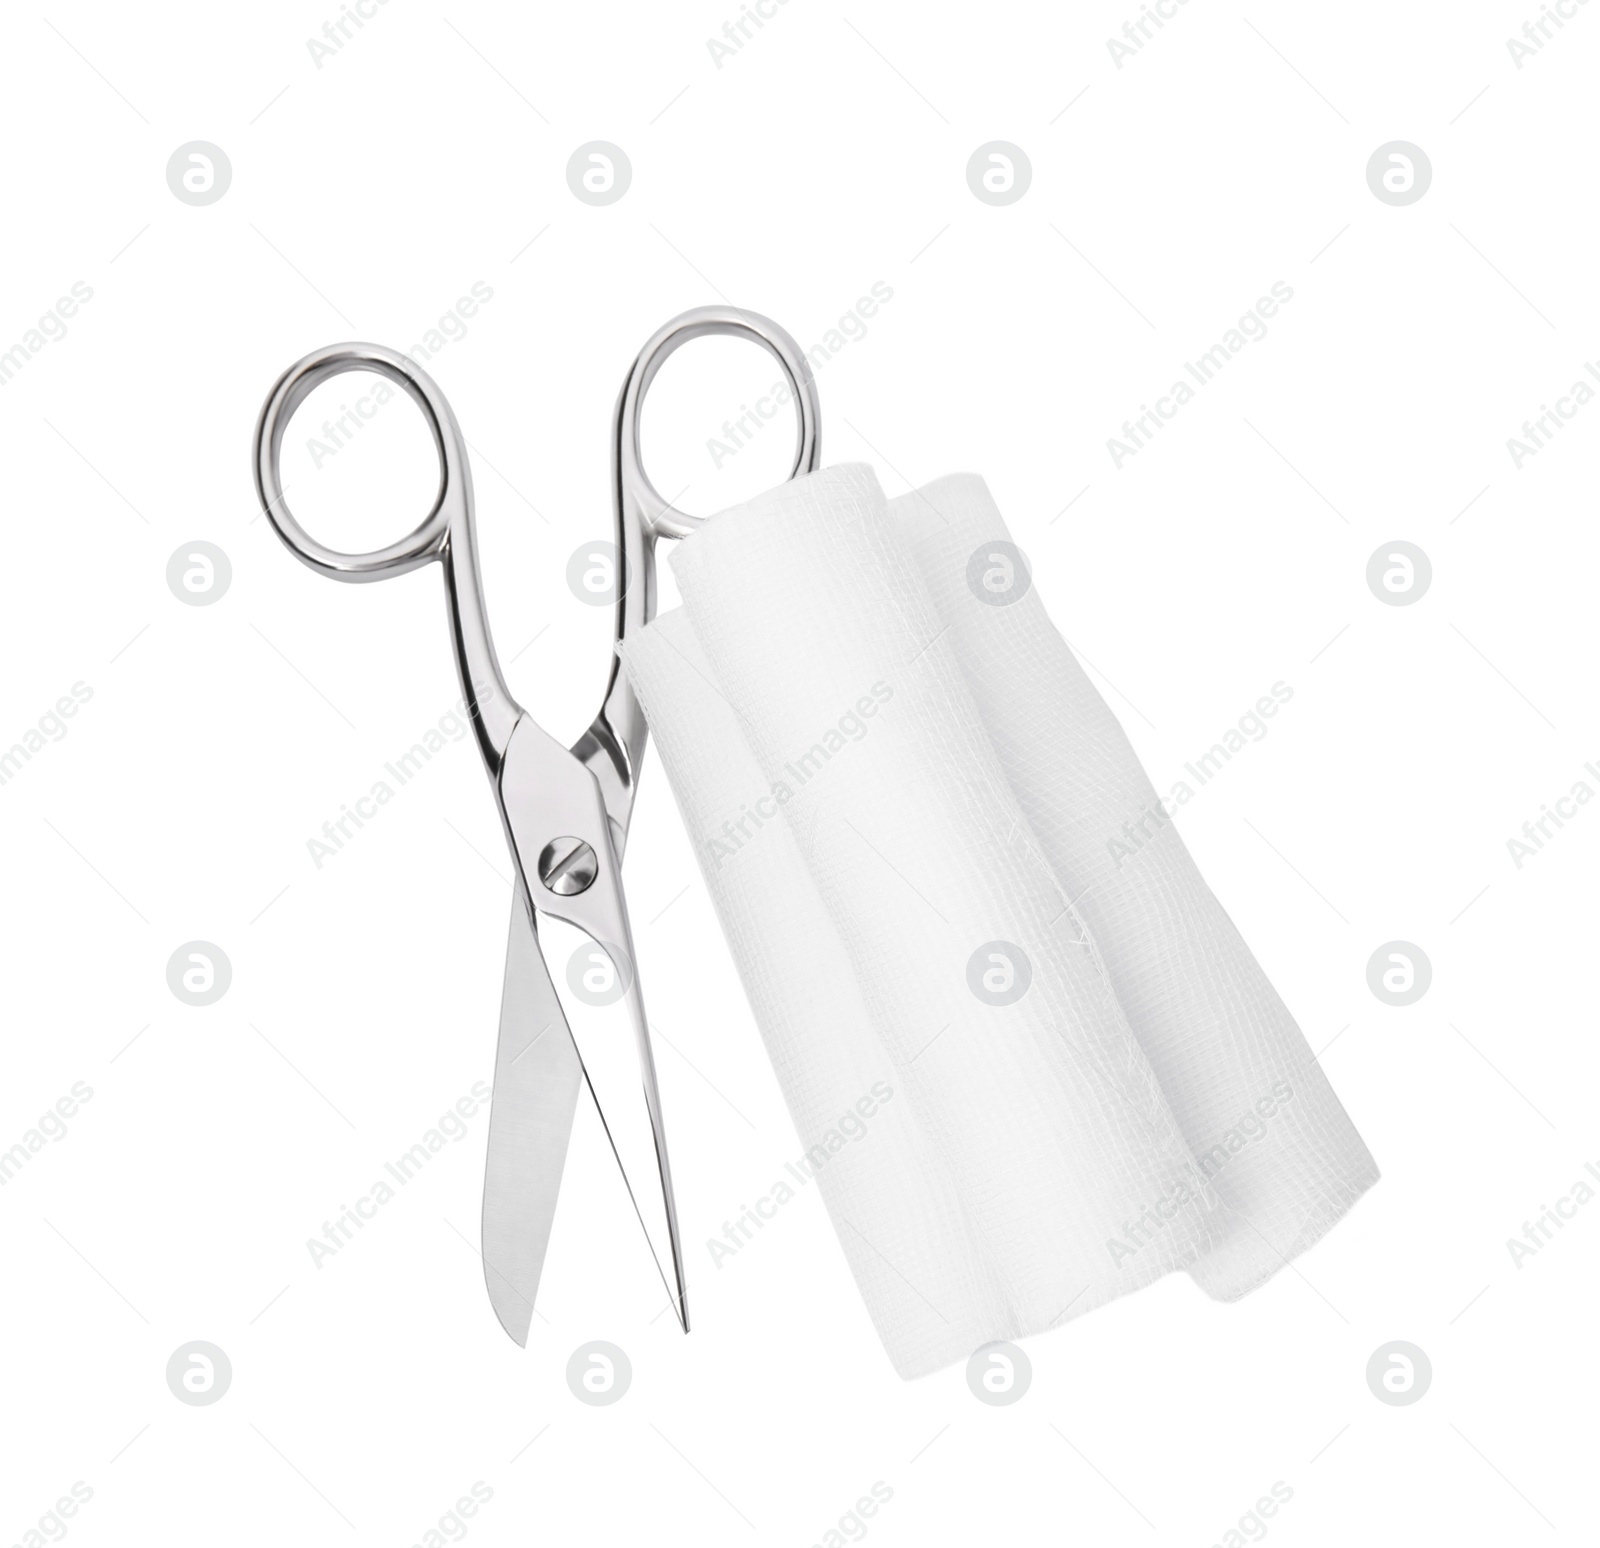 Photo of Medical bandage rolls and scissors on white background, top view